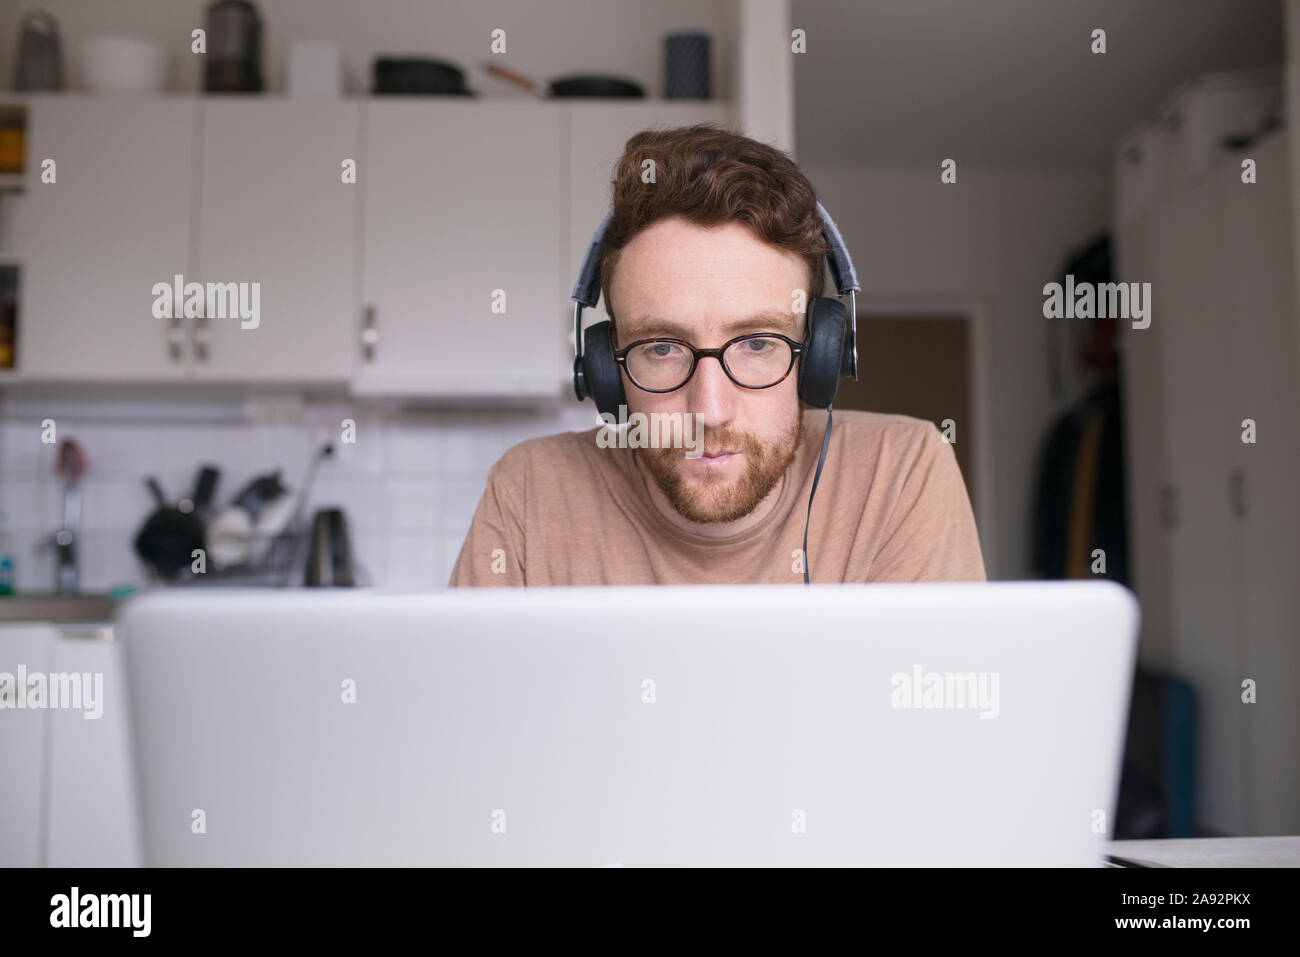 Man working on laptop at home Banque D'Images